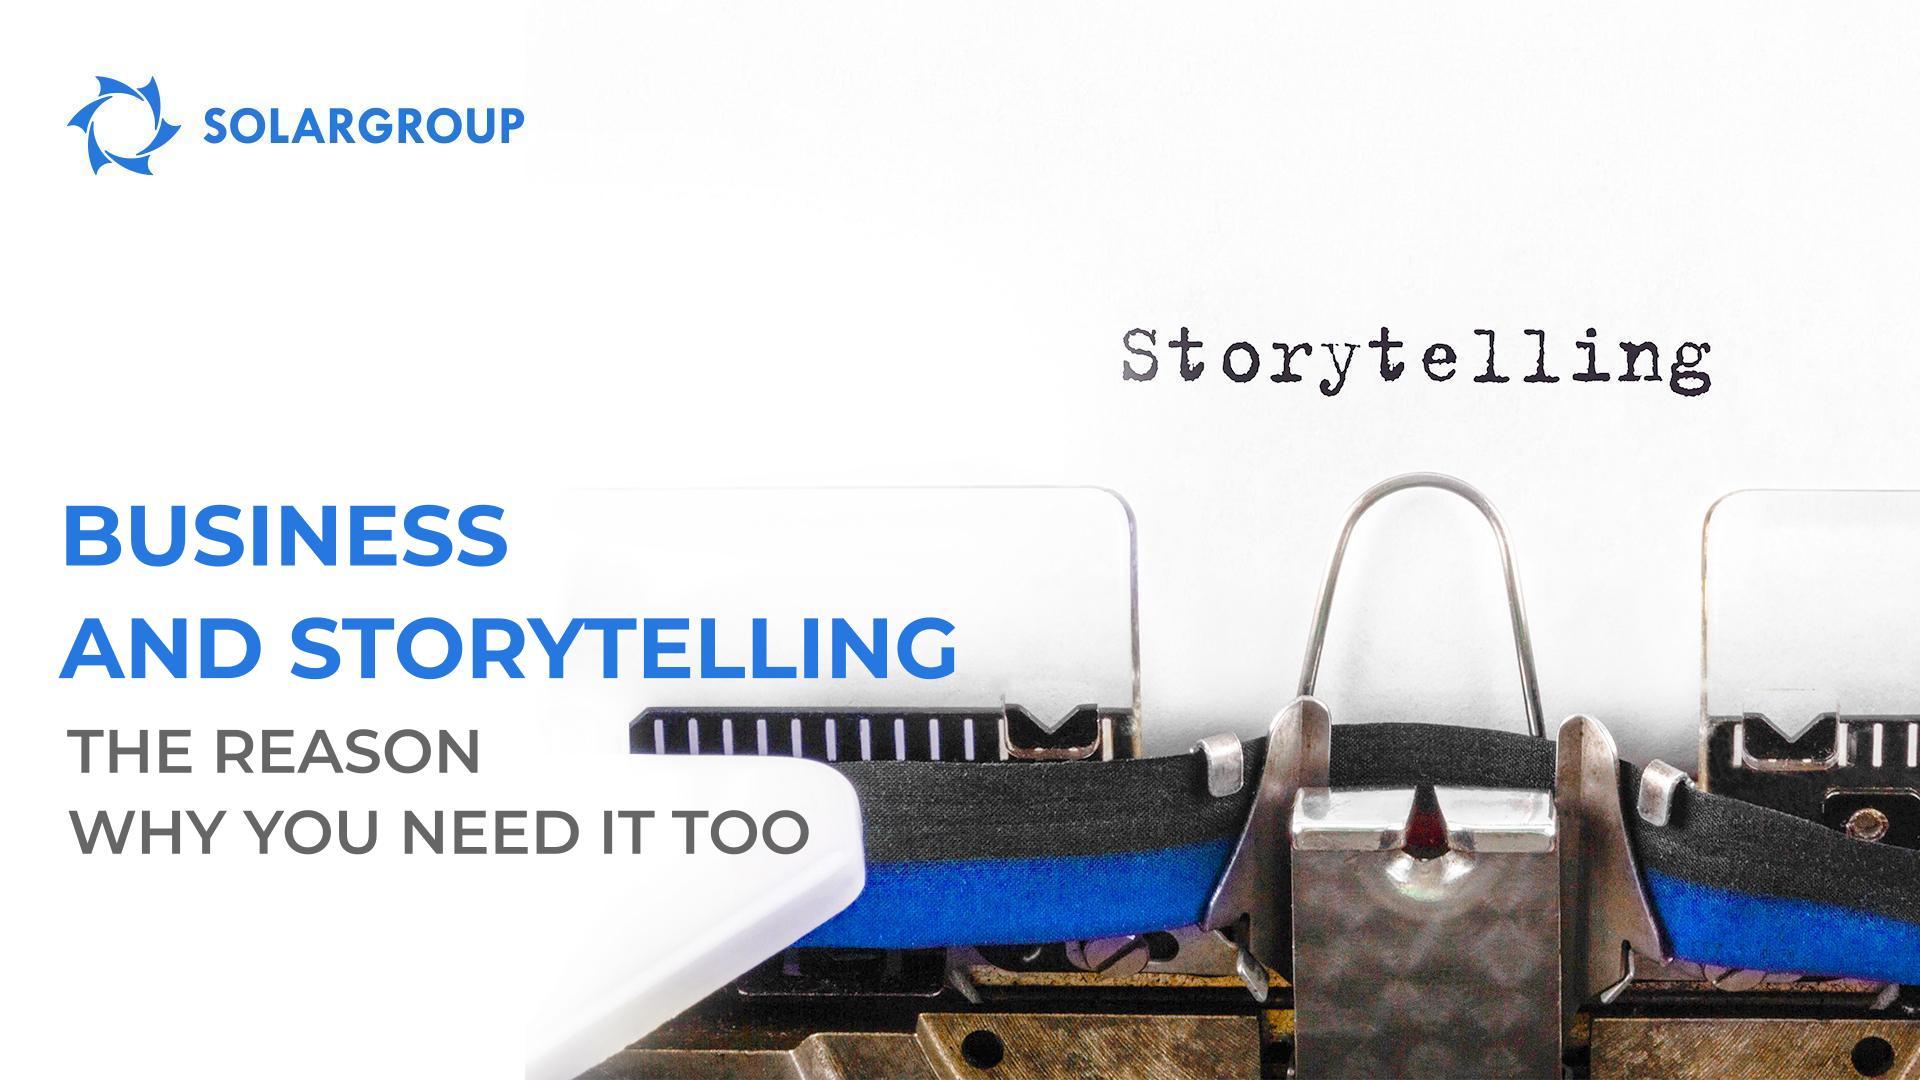 Business and storytelling: the reason why you need it too